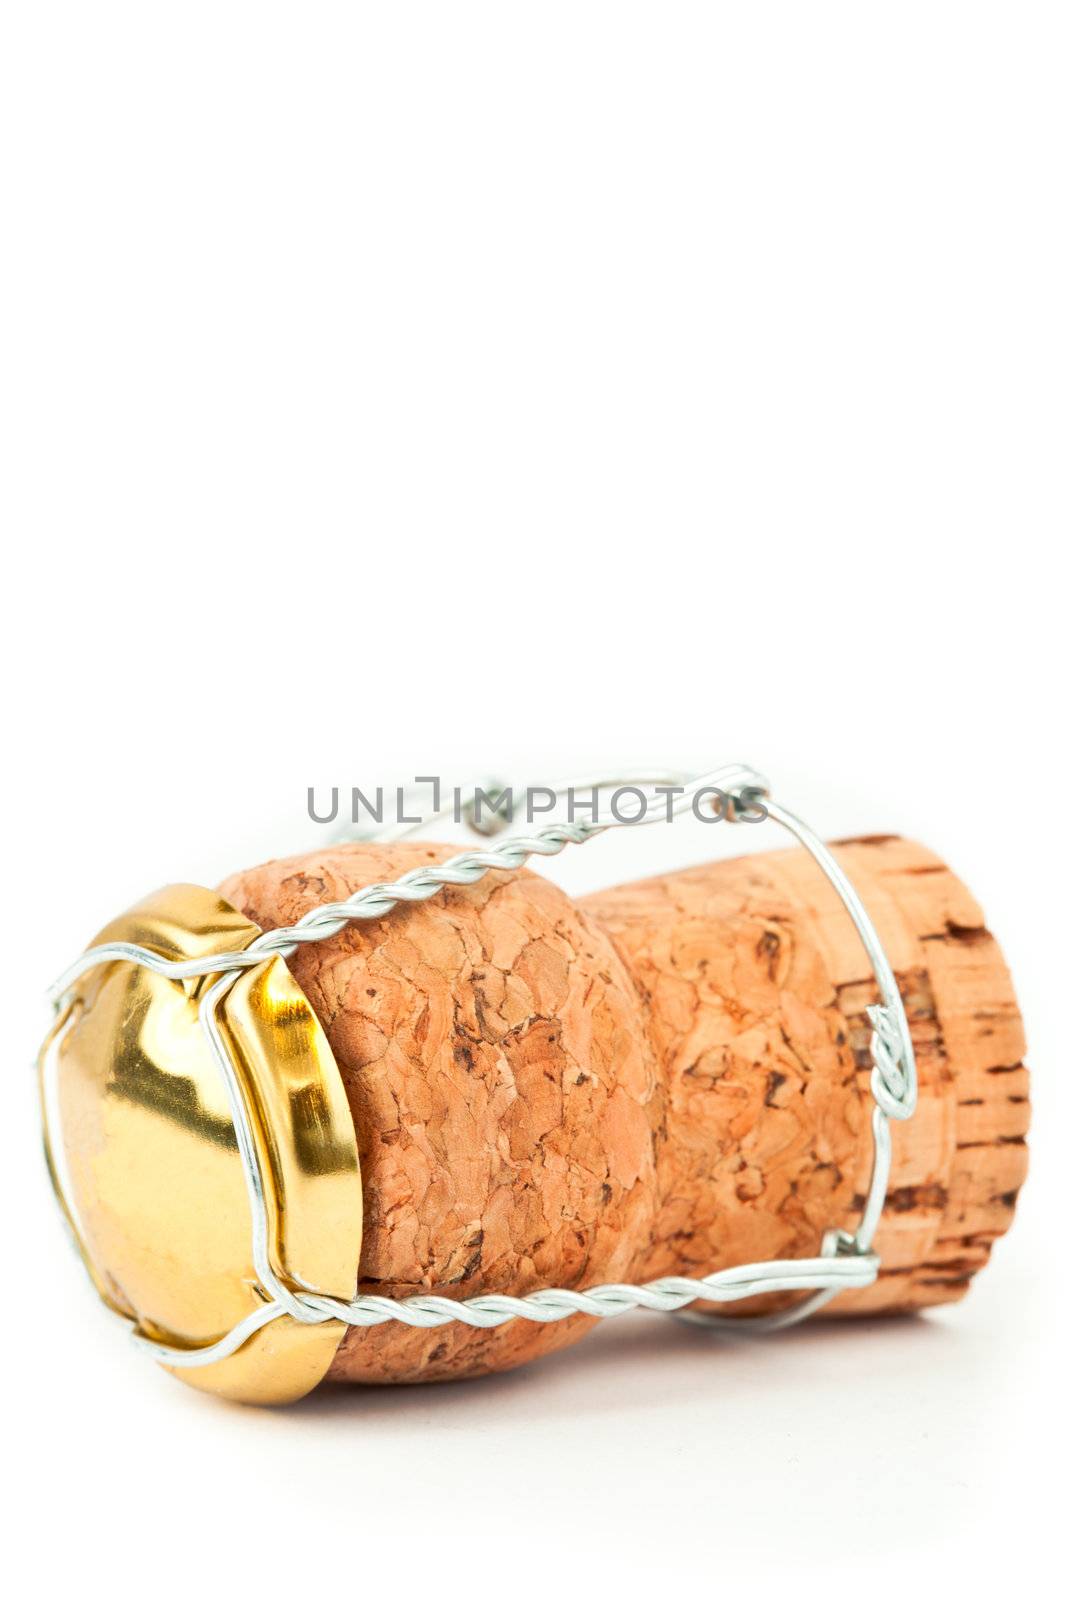 Close up of a cork with iron wire against a white background